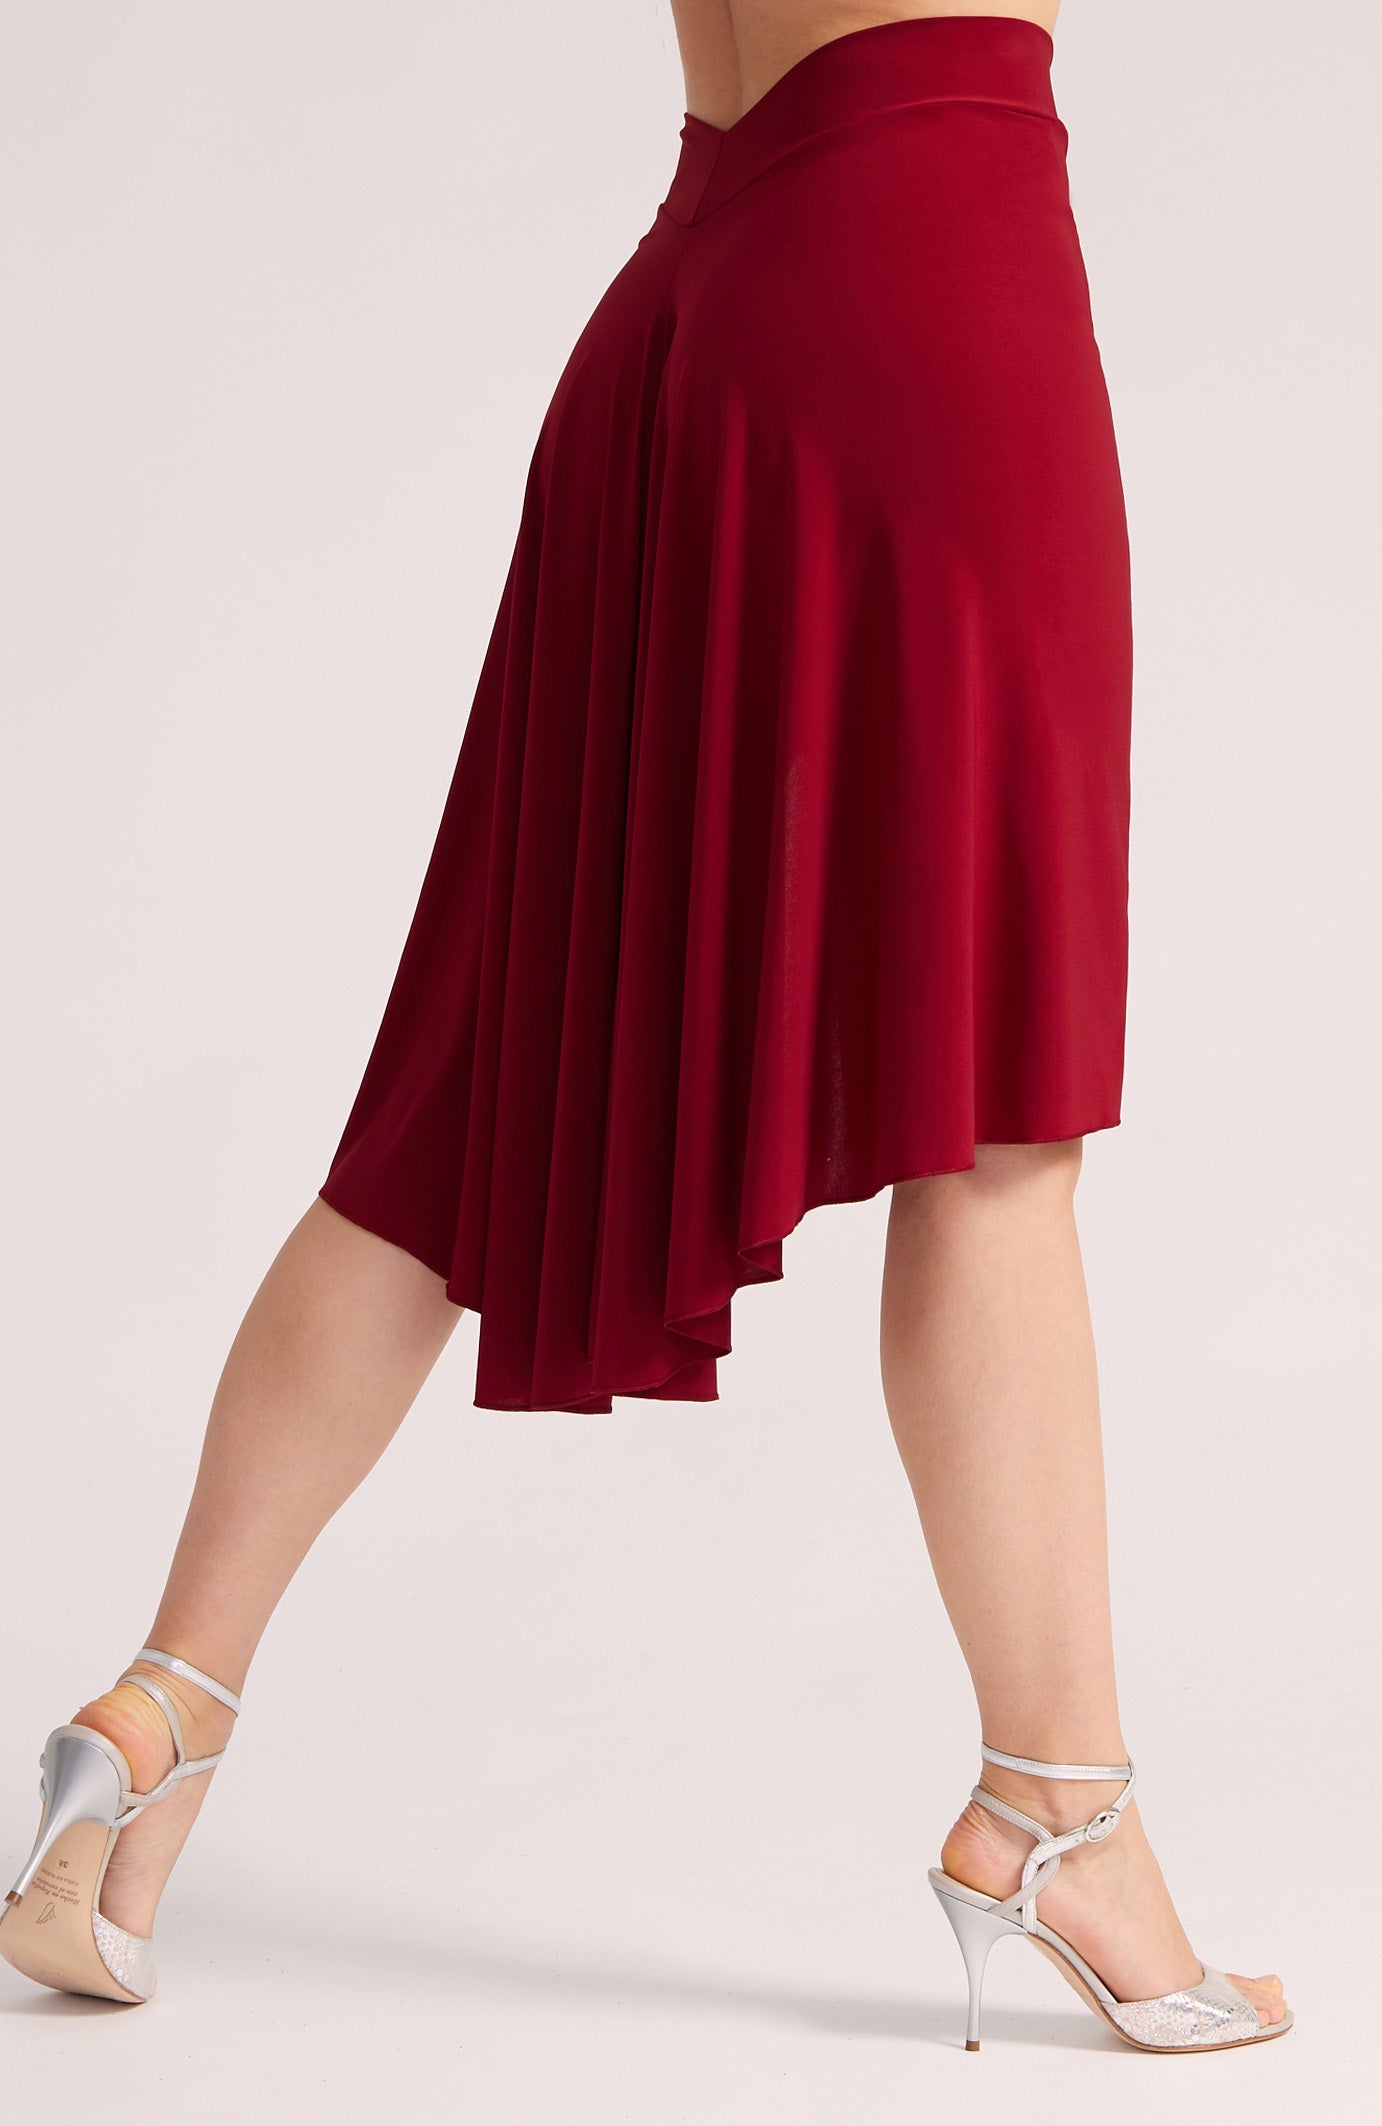 PAOLA - Berry Red Argentine Tango Skirt (with Slit)